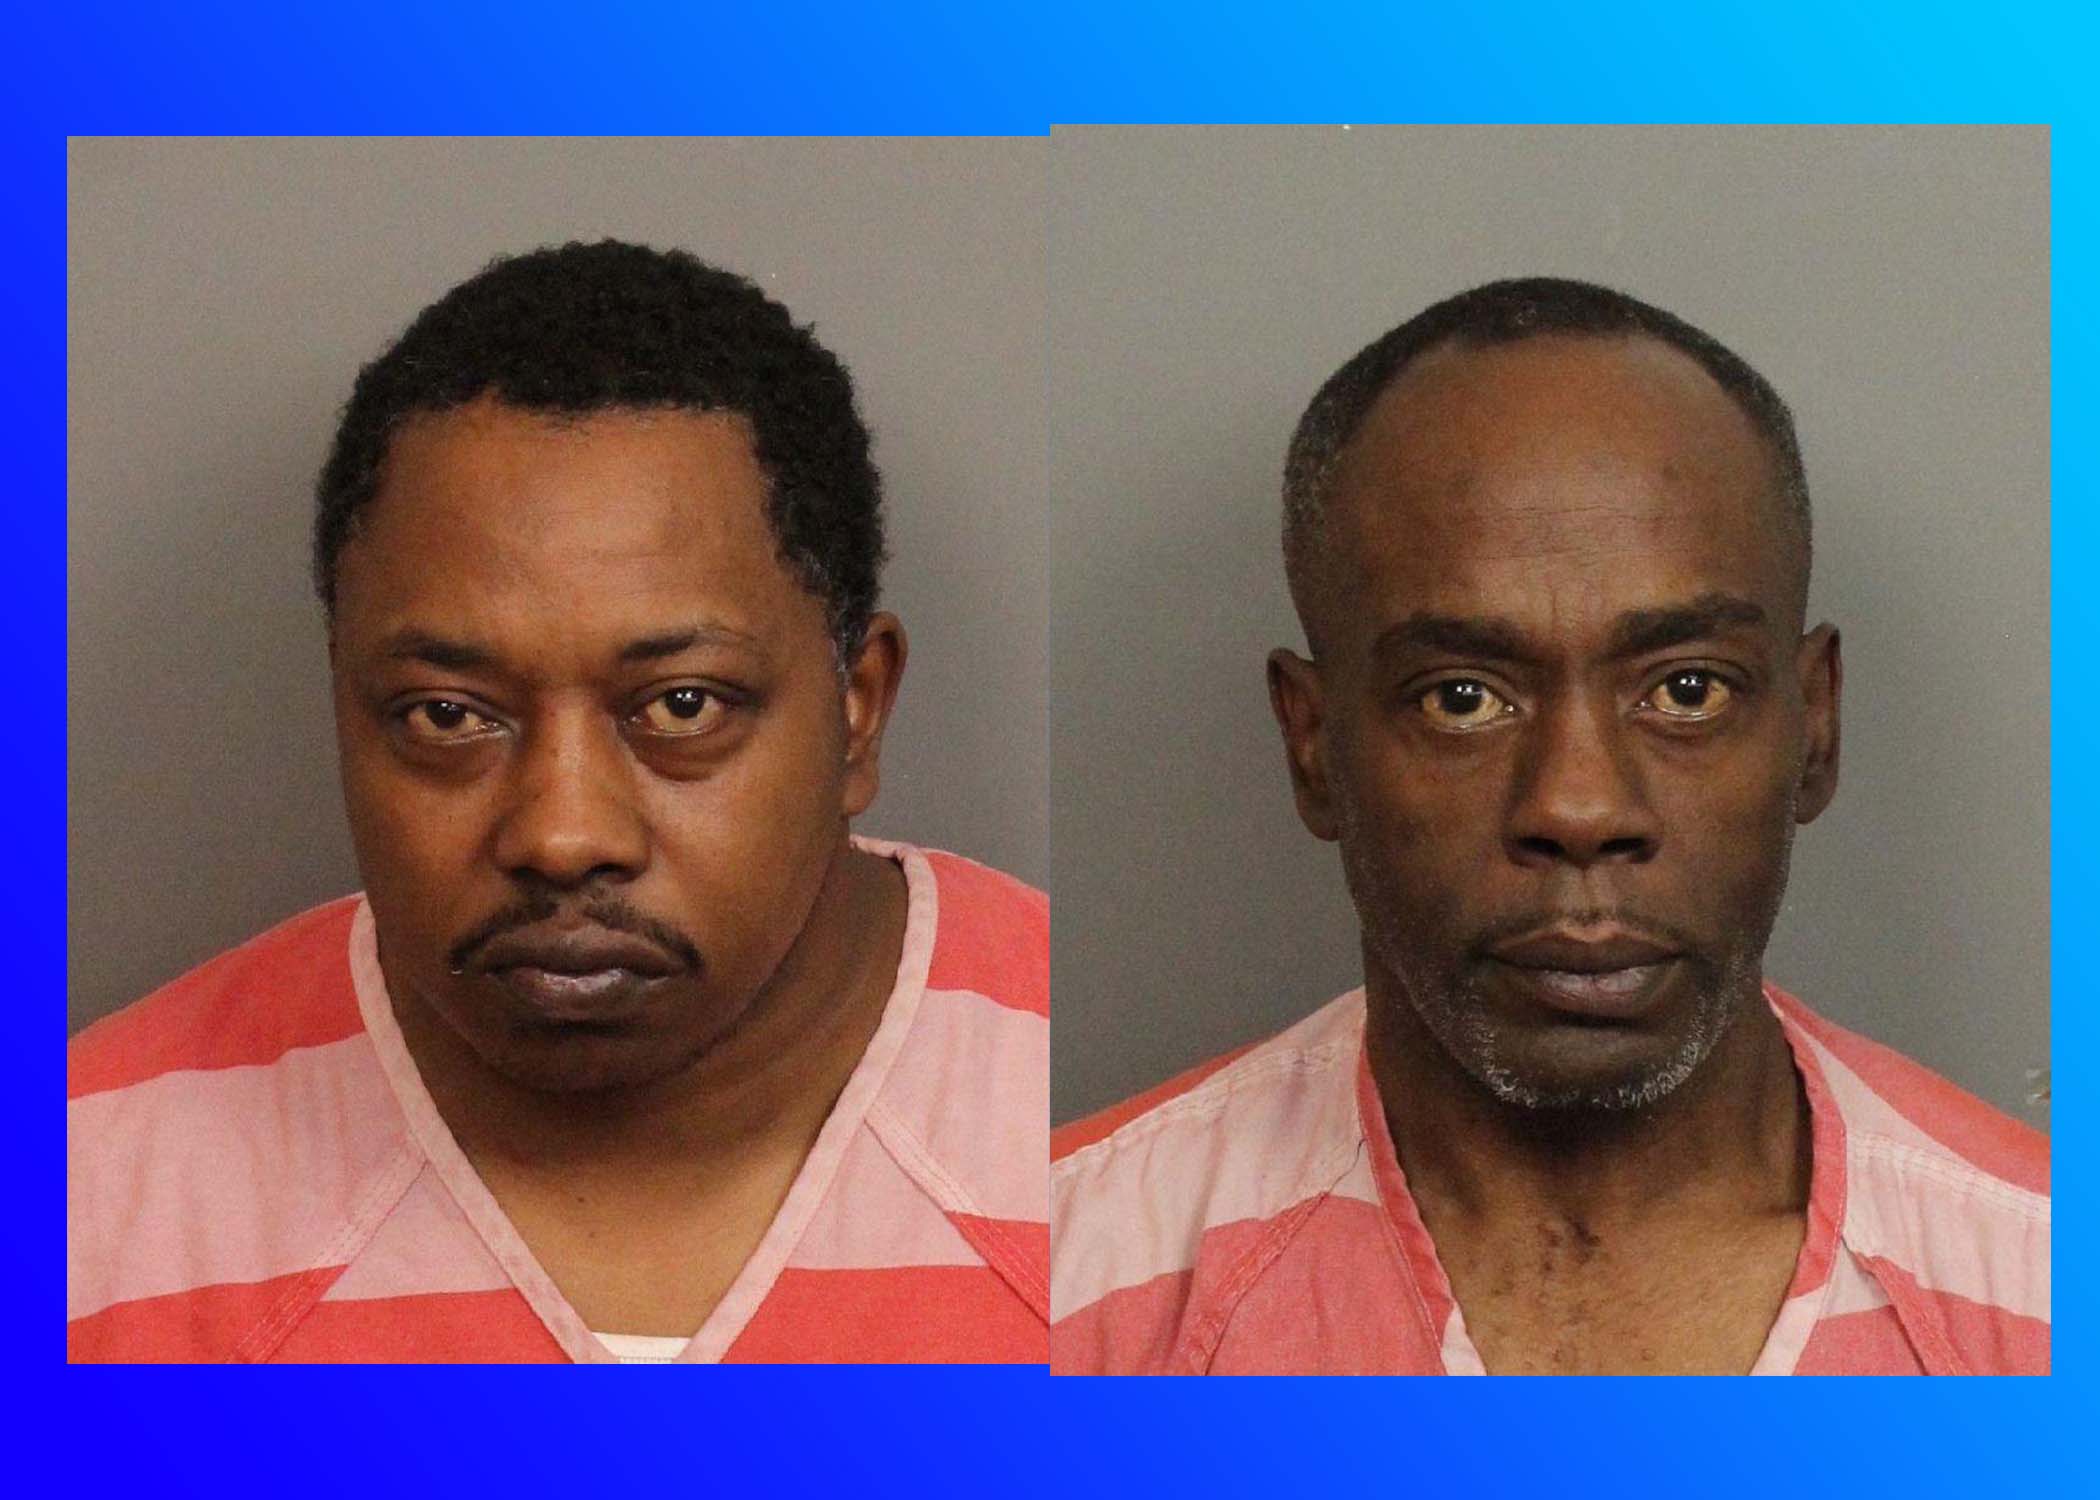 Update: Two arrested in connection to October 2021 homicide